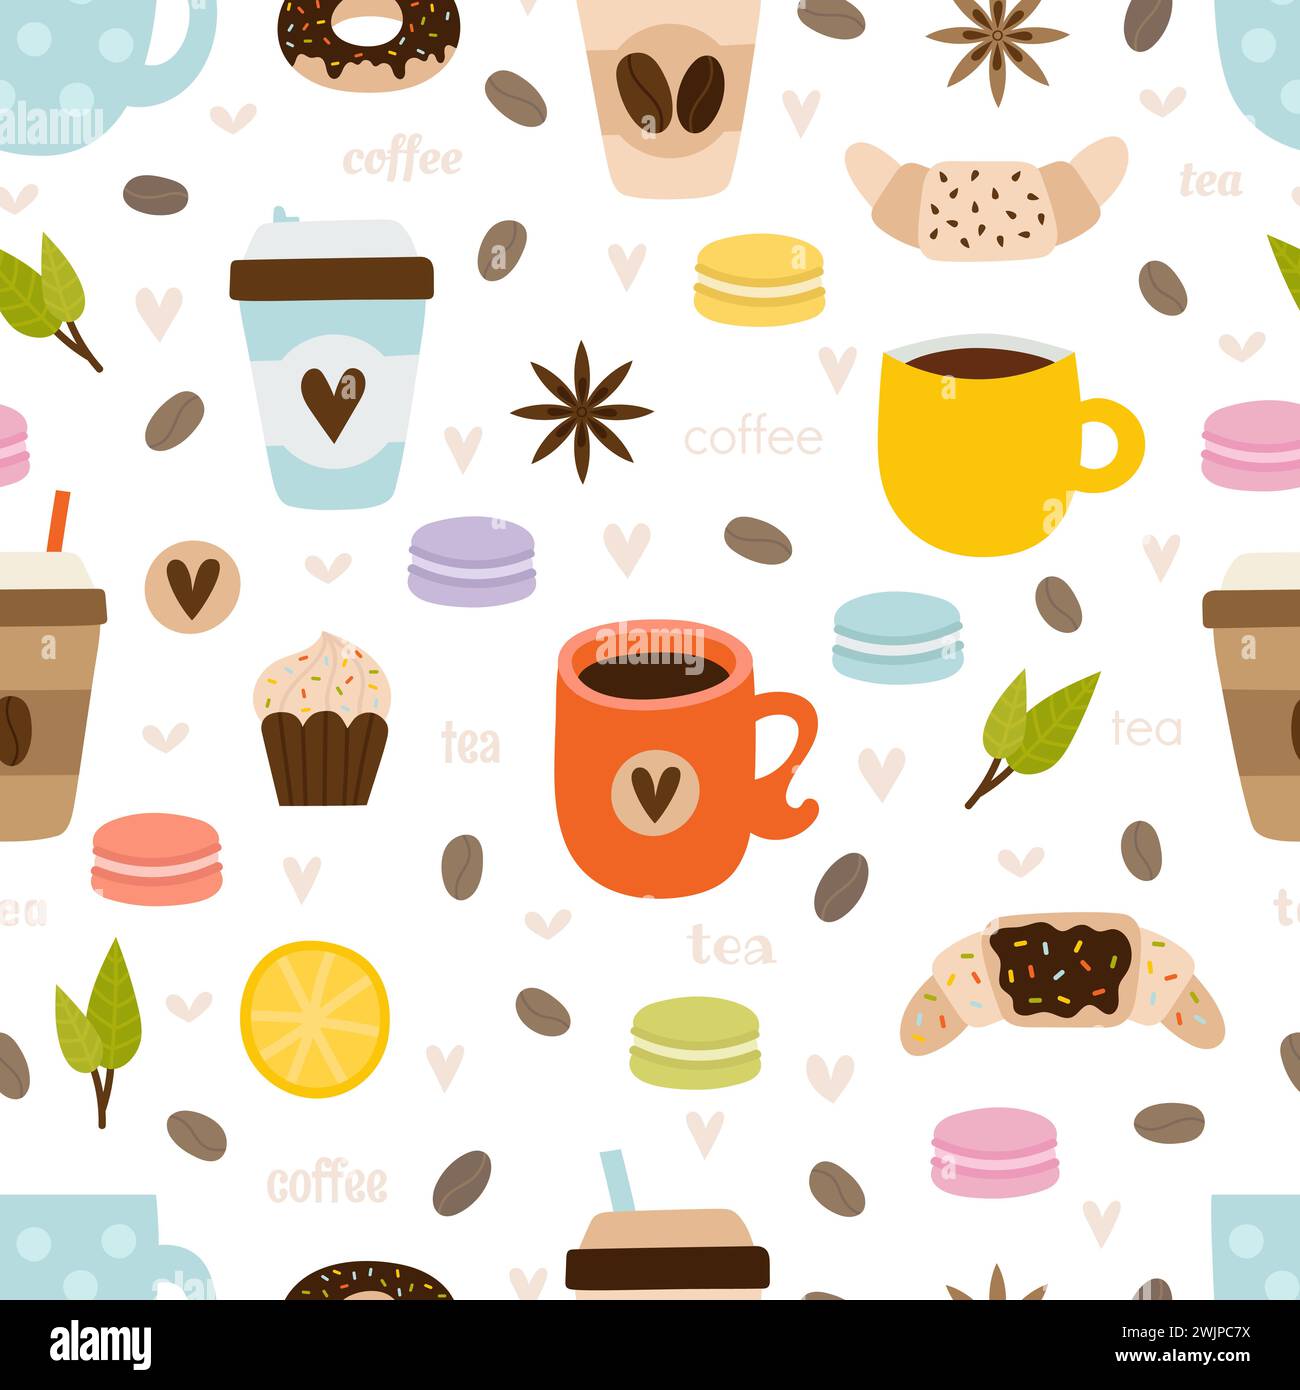 Hand drawn coffee and tea seamless pattern. Set of kitchen tools, symbols, objects and elements. Cute and funny background. Vector illustration Stock Vector